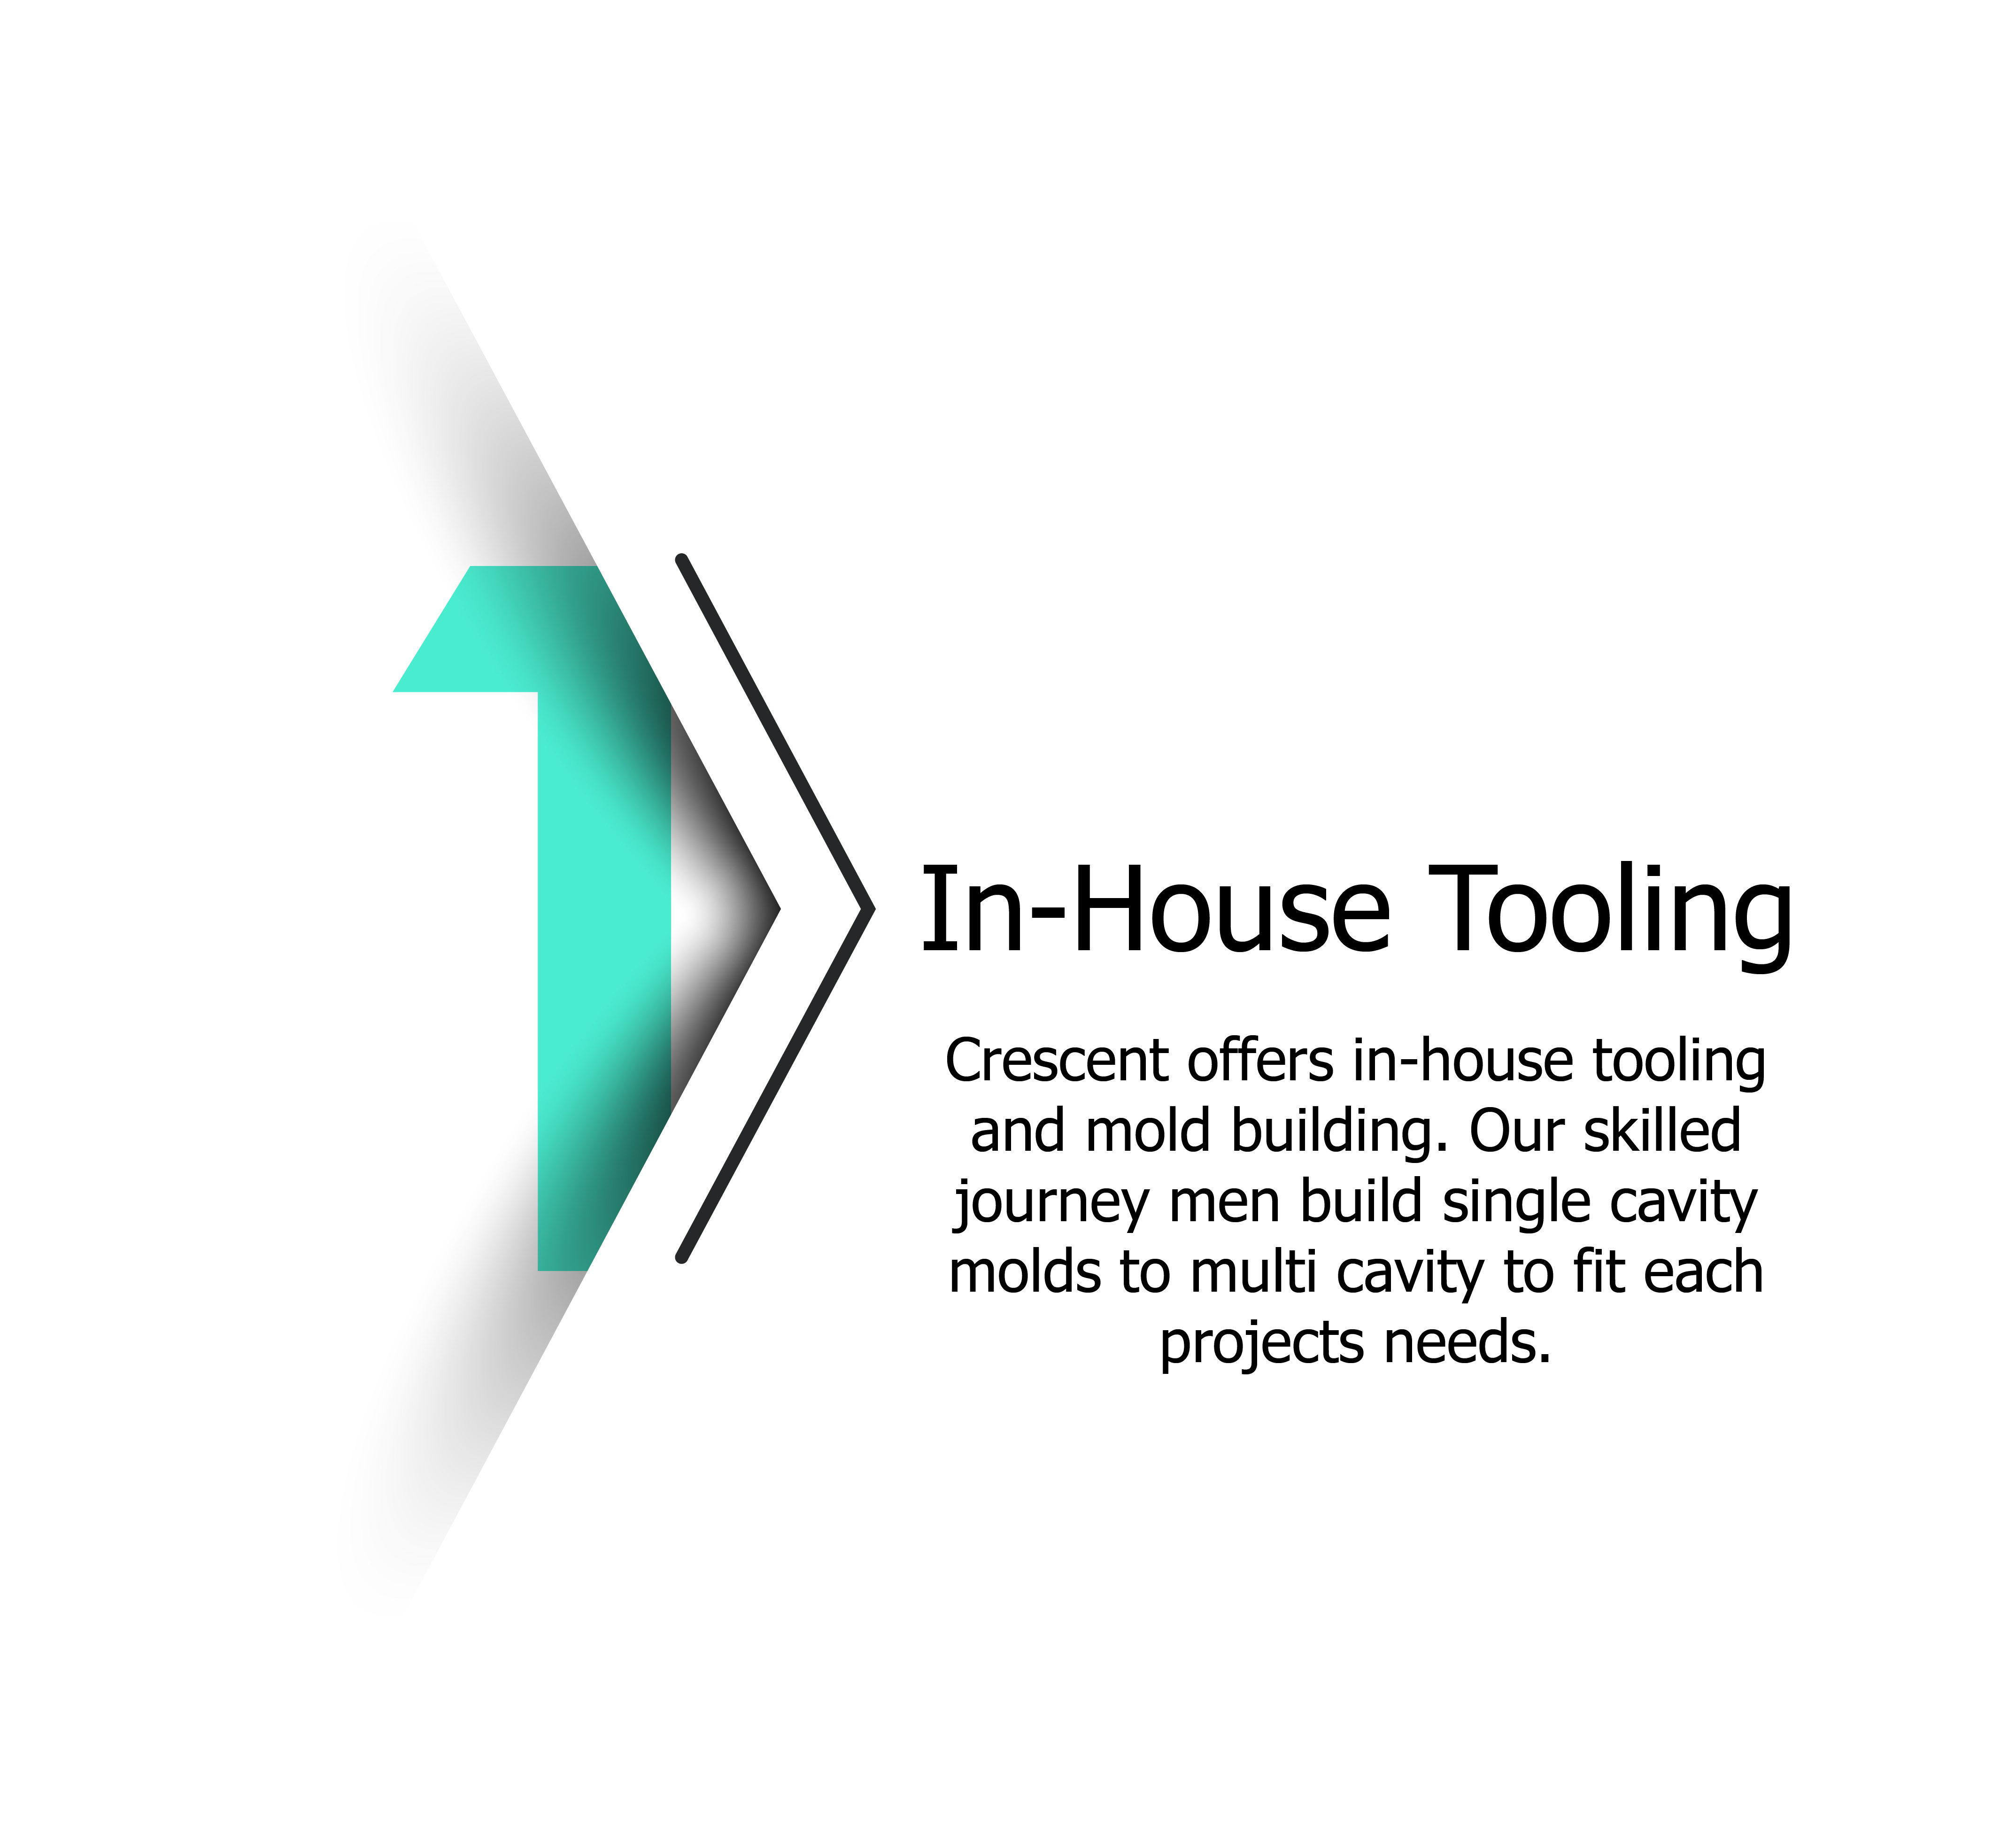 In-House Tooling & Mold Building